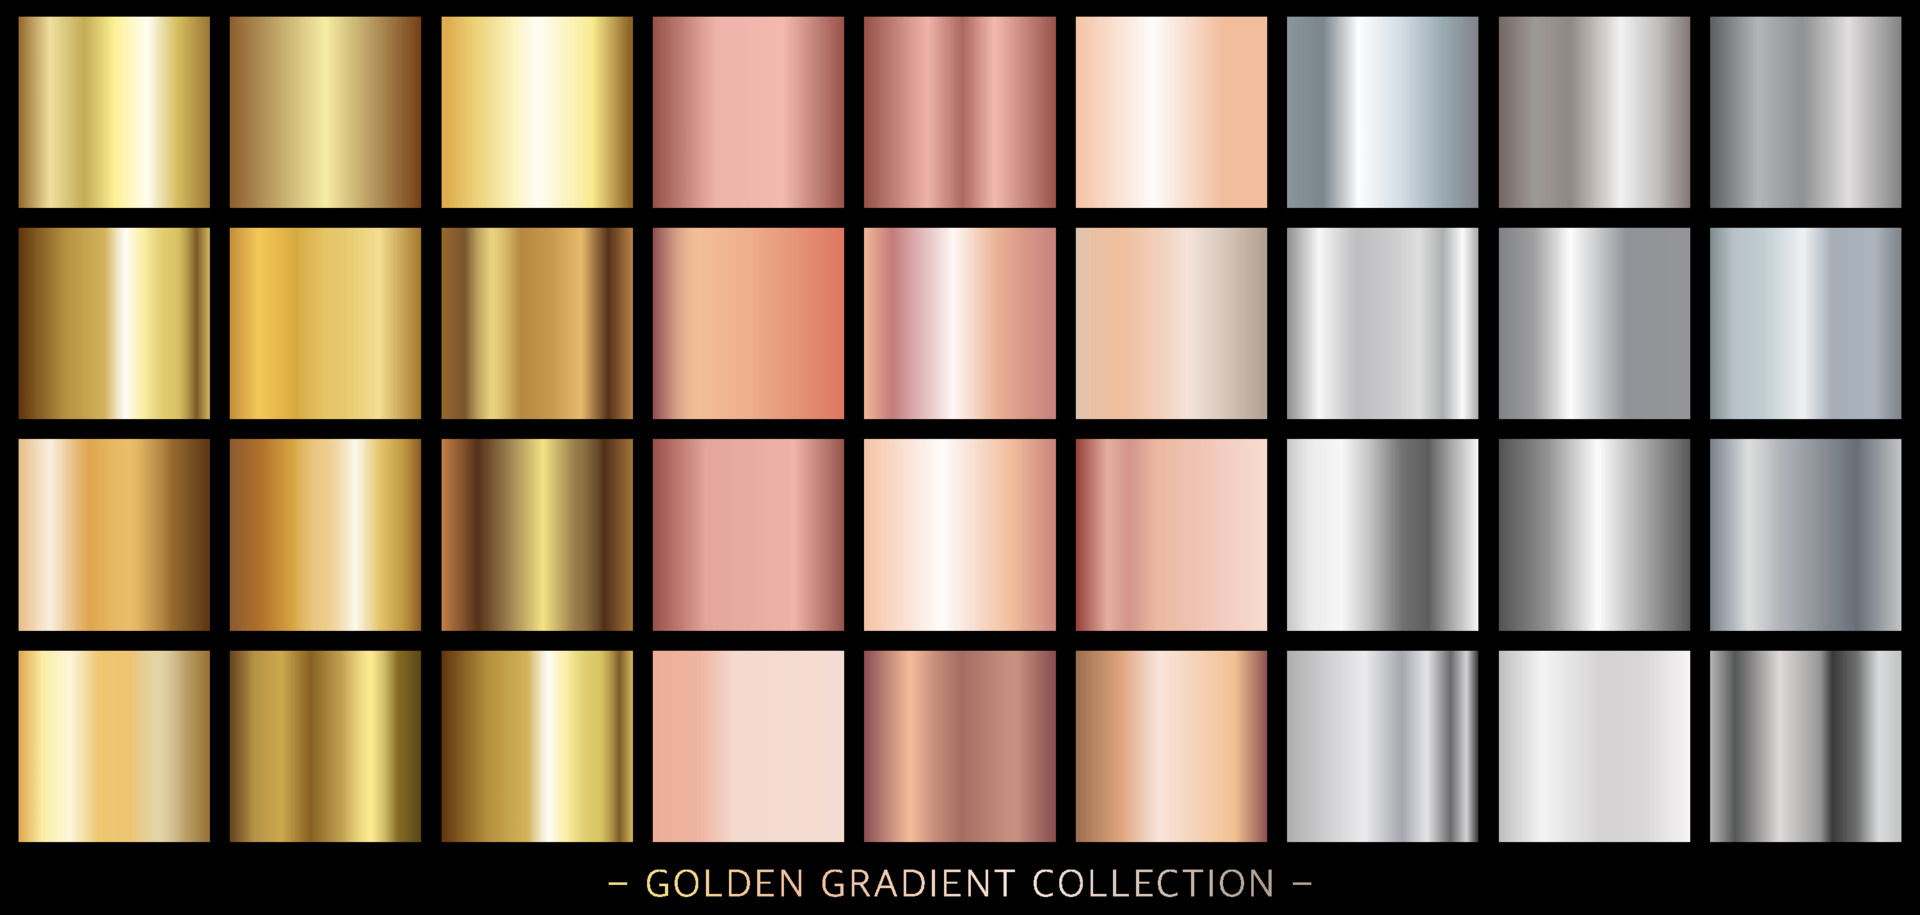 2. Metallic shades like gold or silver - wide 7